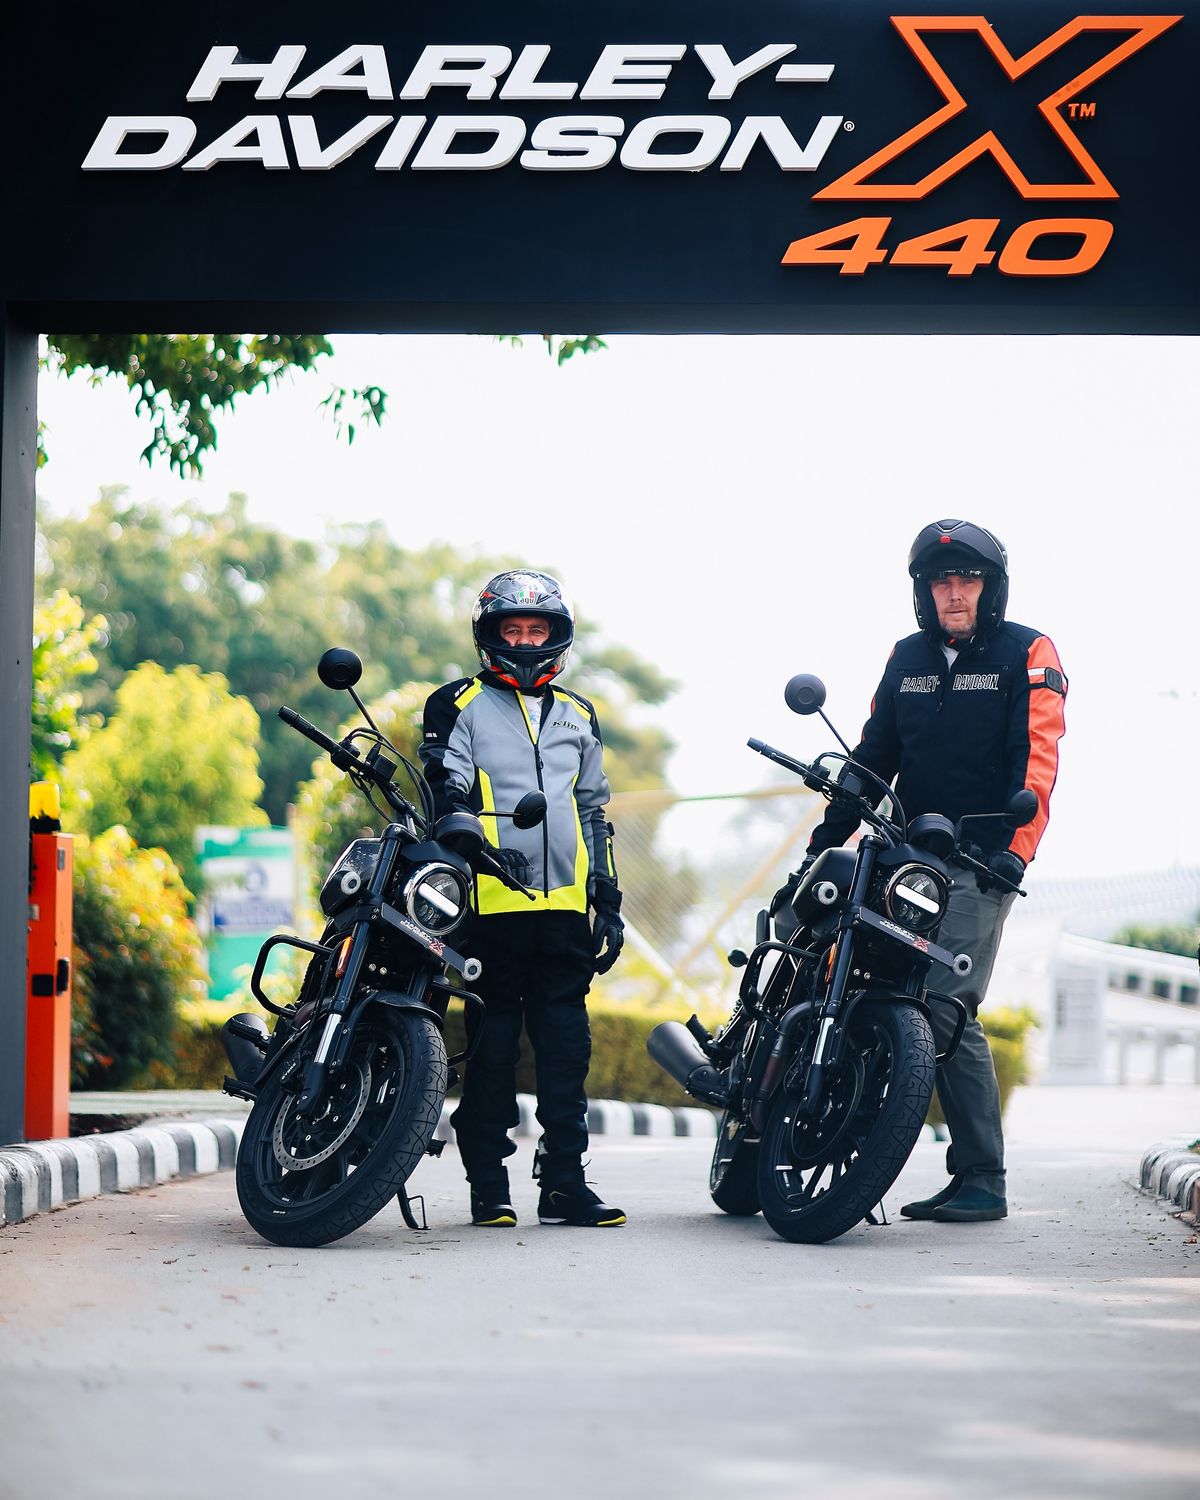 Bookings to open for ‘HARLEY-DAVIDSON X440’ across India